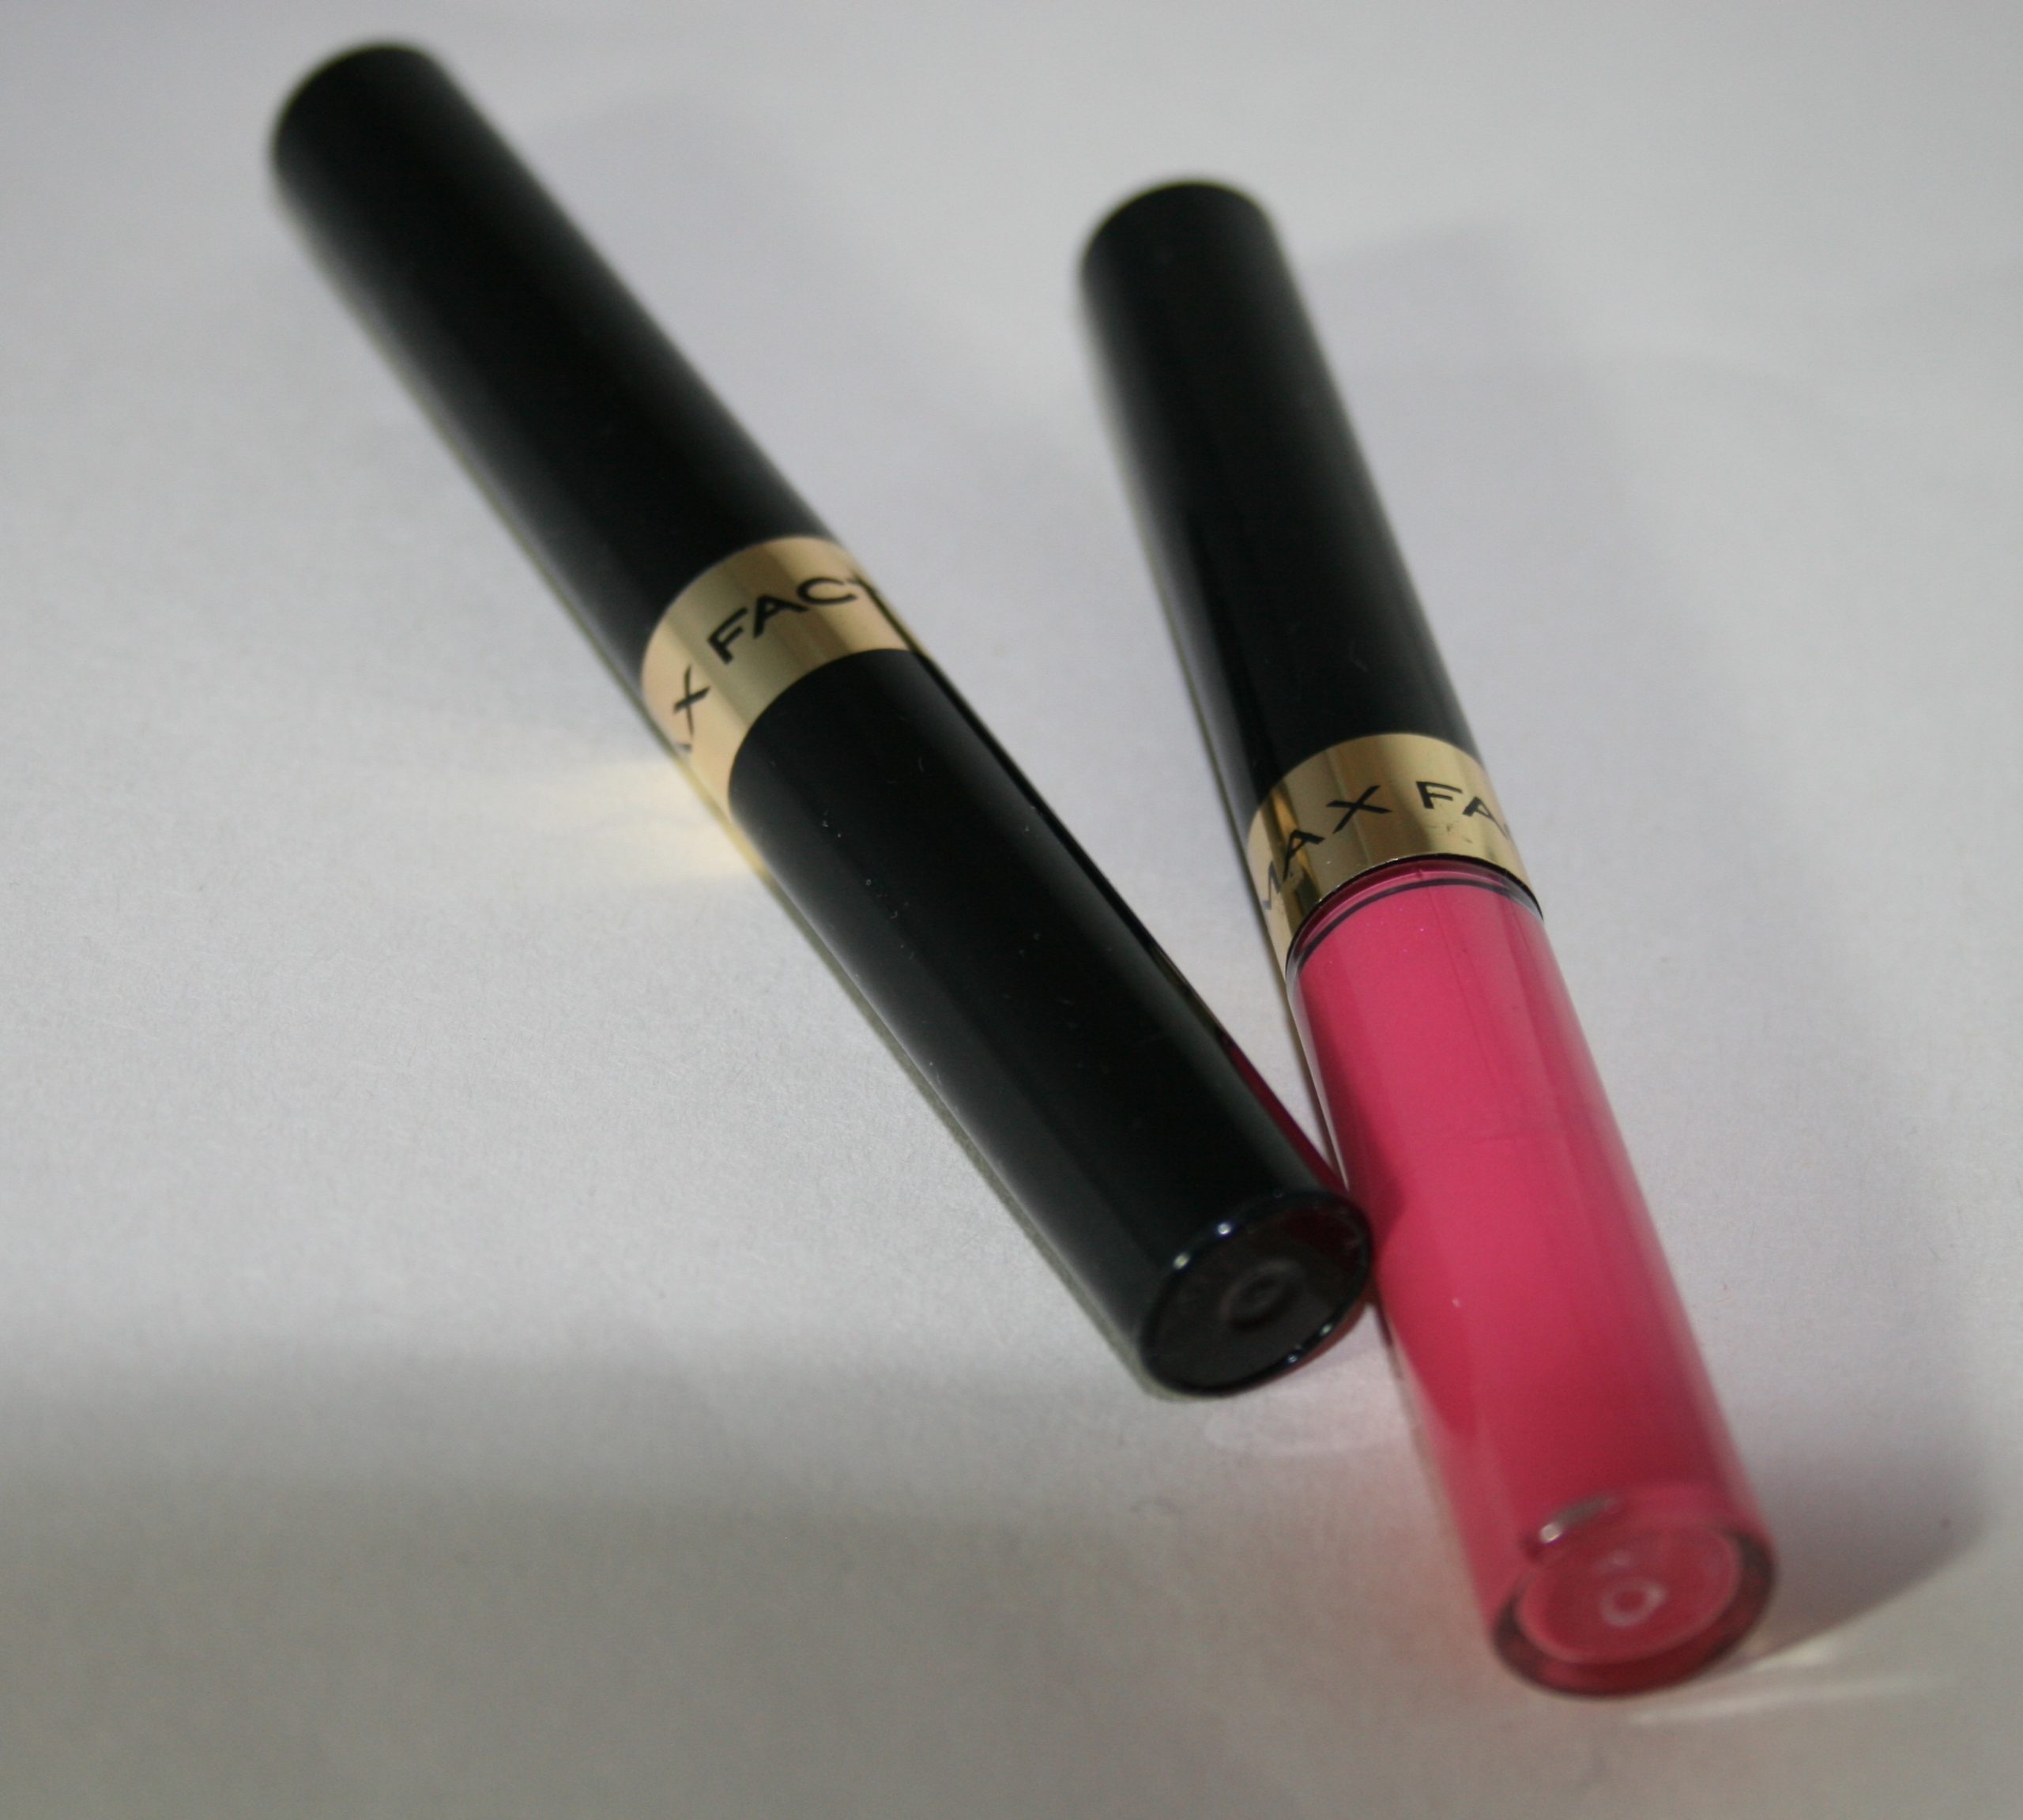 Max Factor Lipfinity: New Shades and Stay Cheerful Review